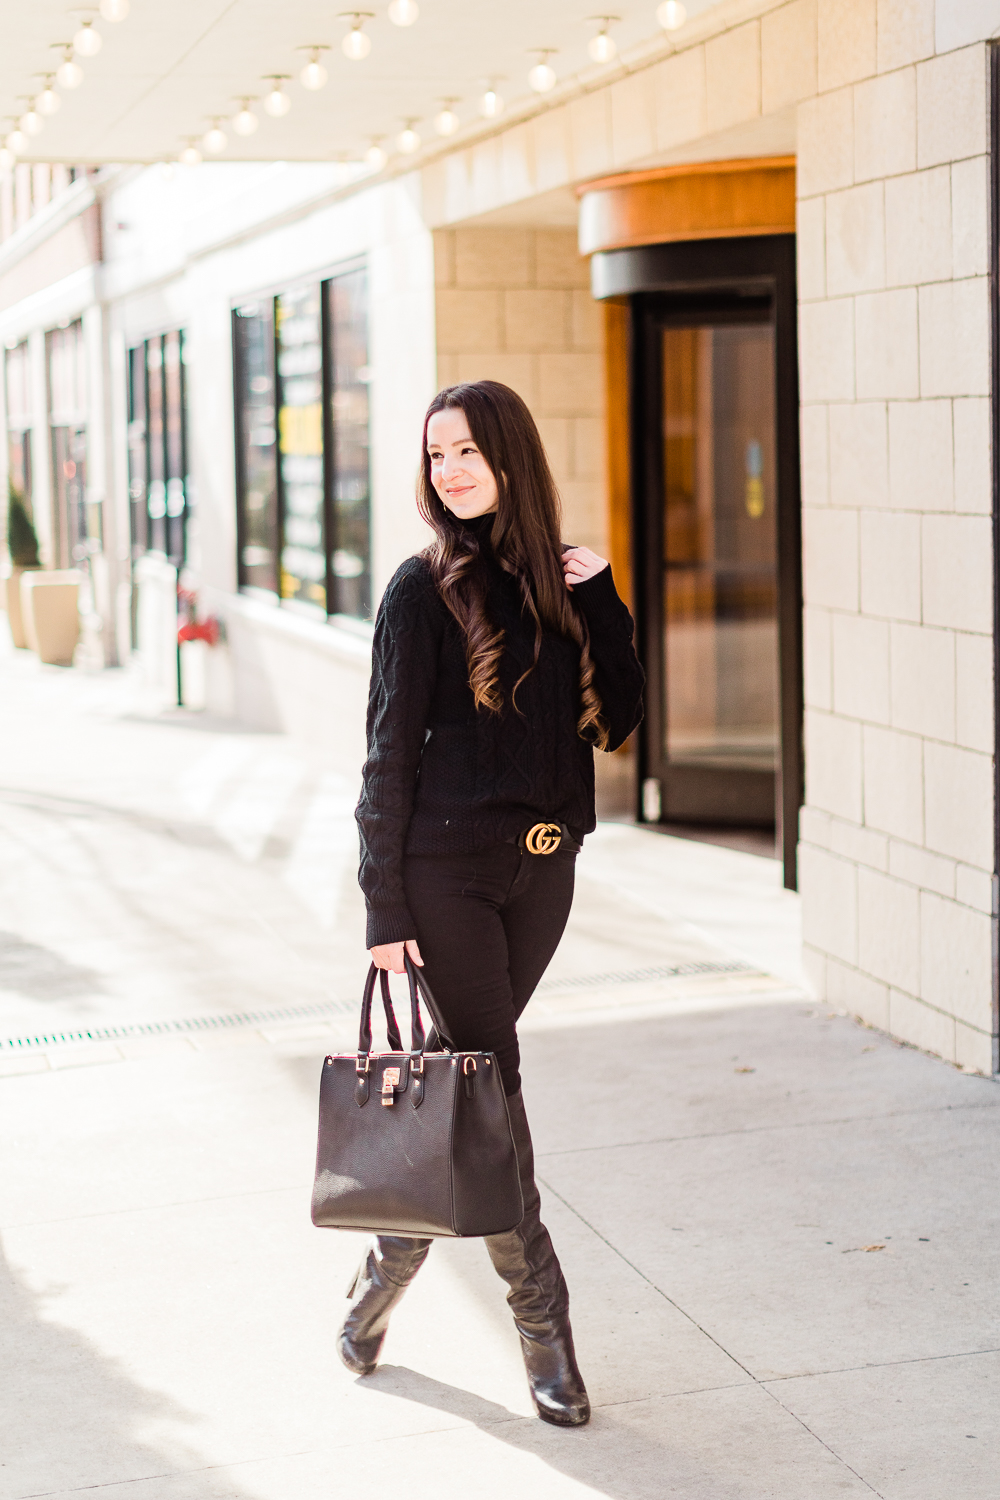 All Black Winter Outfit and The Best Gucci Belt Dupe on Amazon by affordable fashion and southern lifestyle blogger Stephanie Ziajka from Diary of a Debutante, Gucci Marmont belt dupe, gucci belt dupe amazon, all black winter outfit ideas